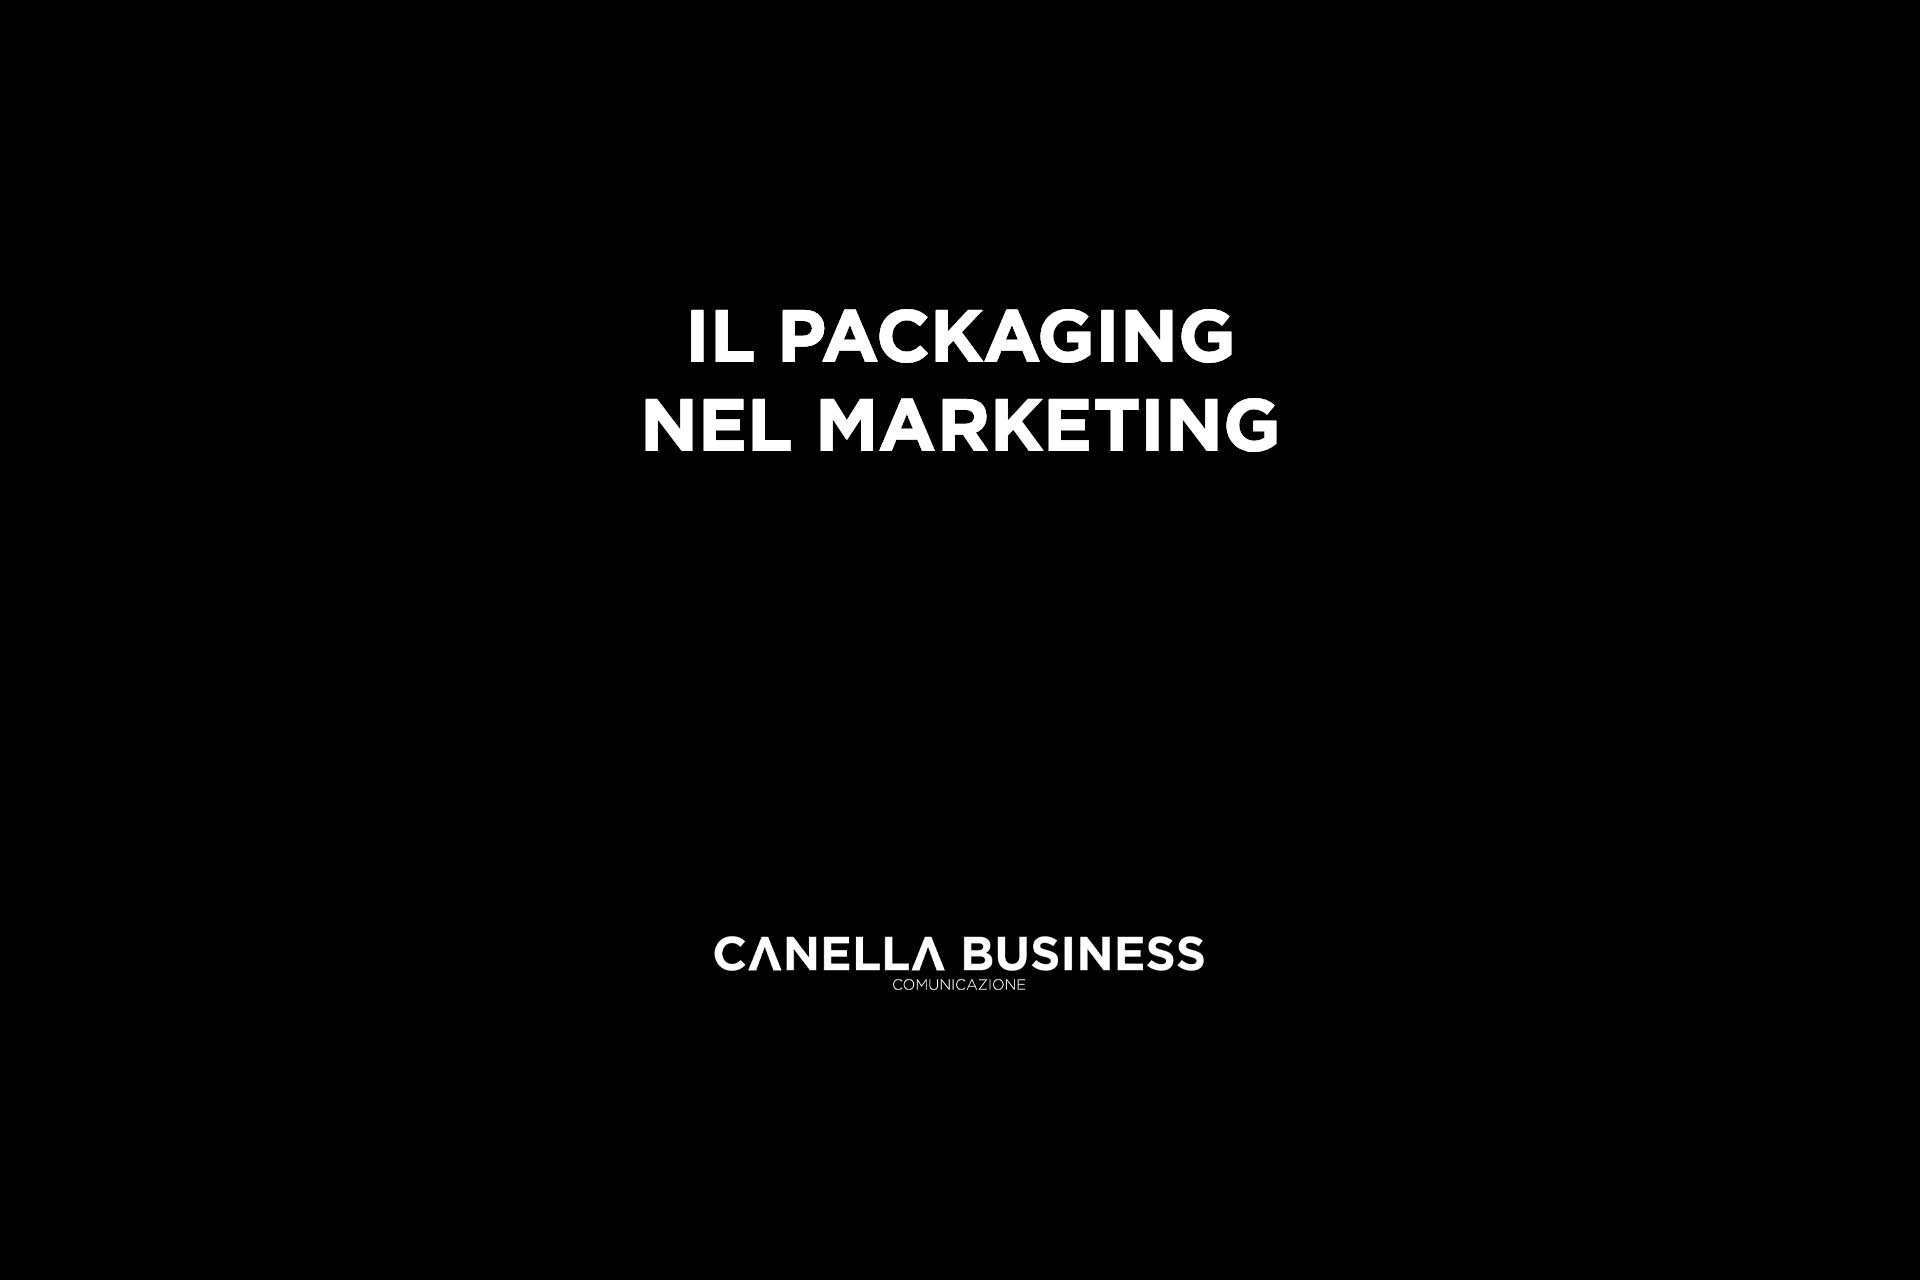 Il packaging nel marketing